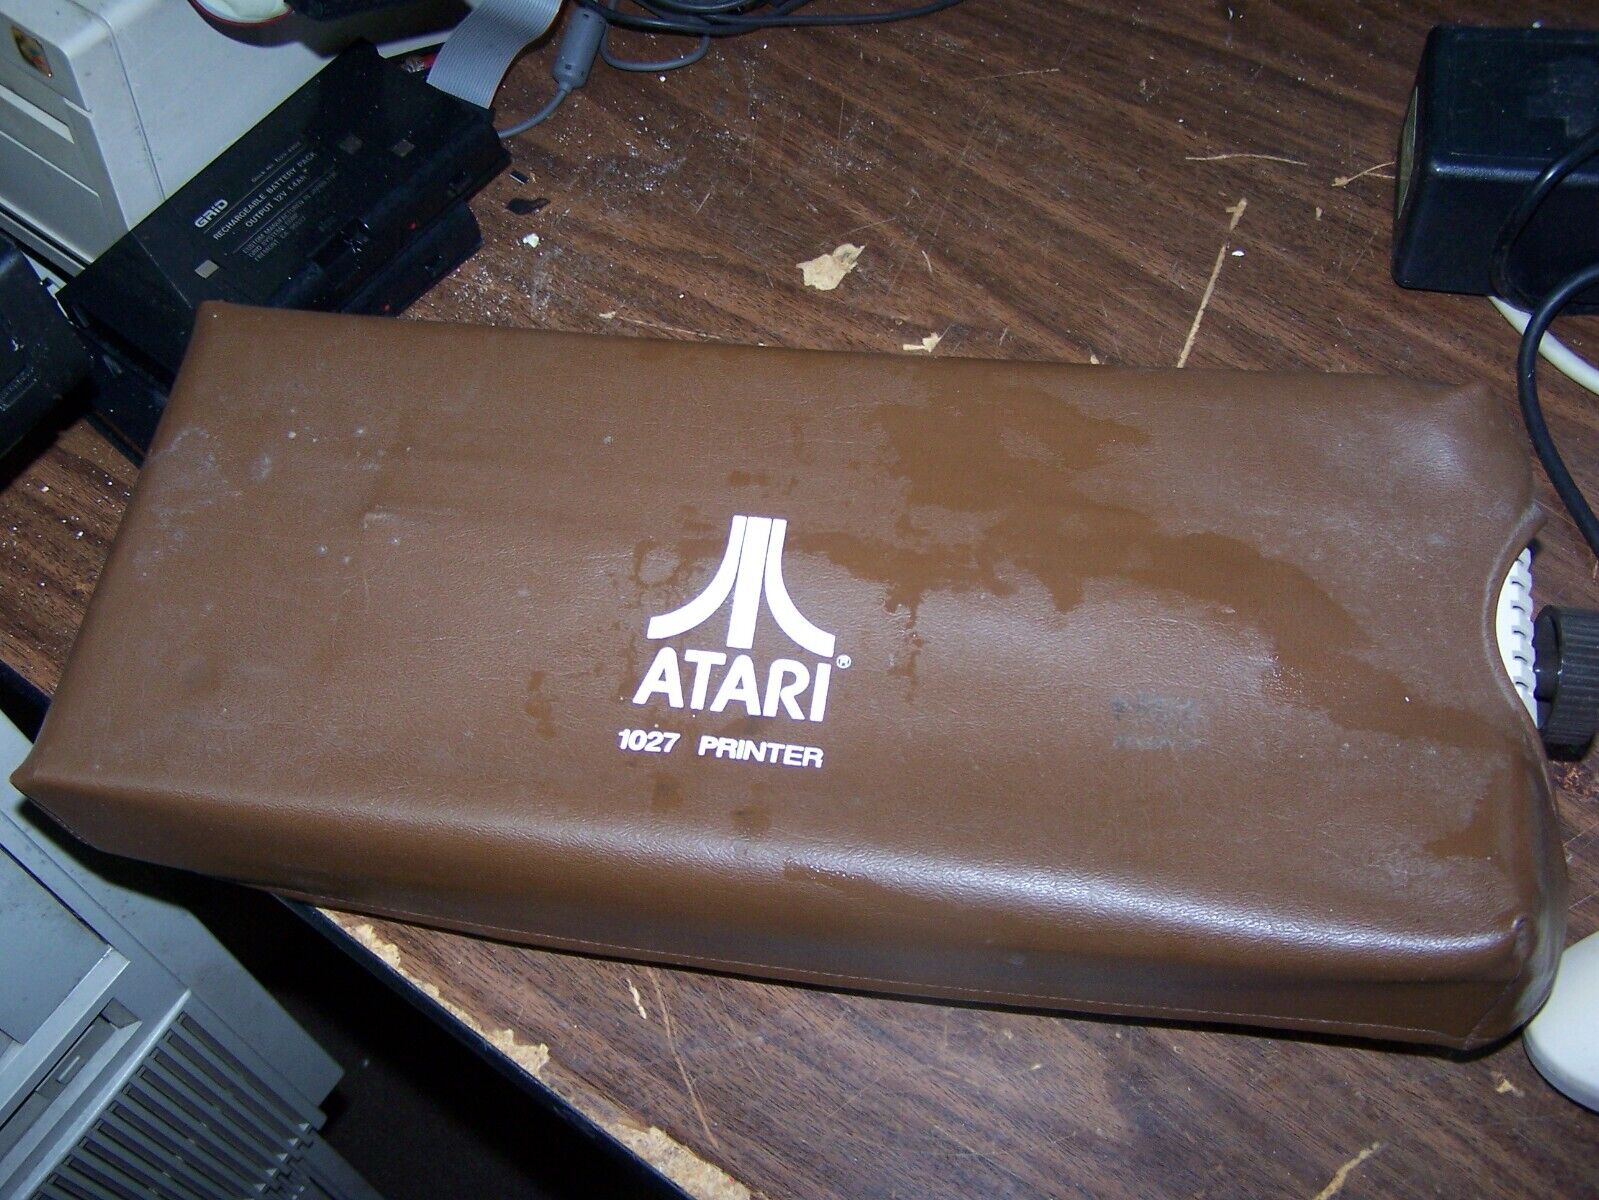 Atari 1027 Printer with cover - Estate Sale SOLD AS IS